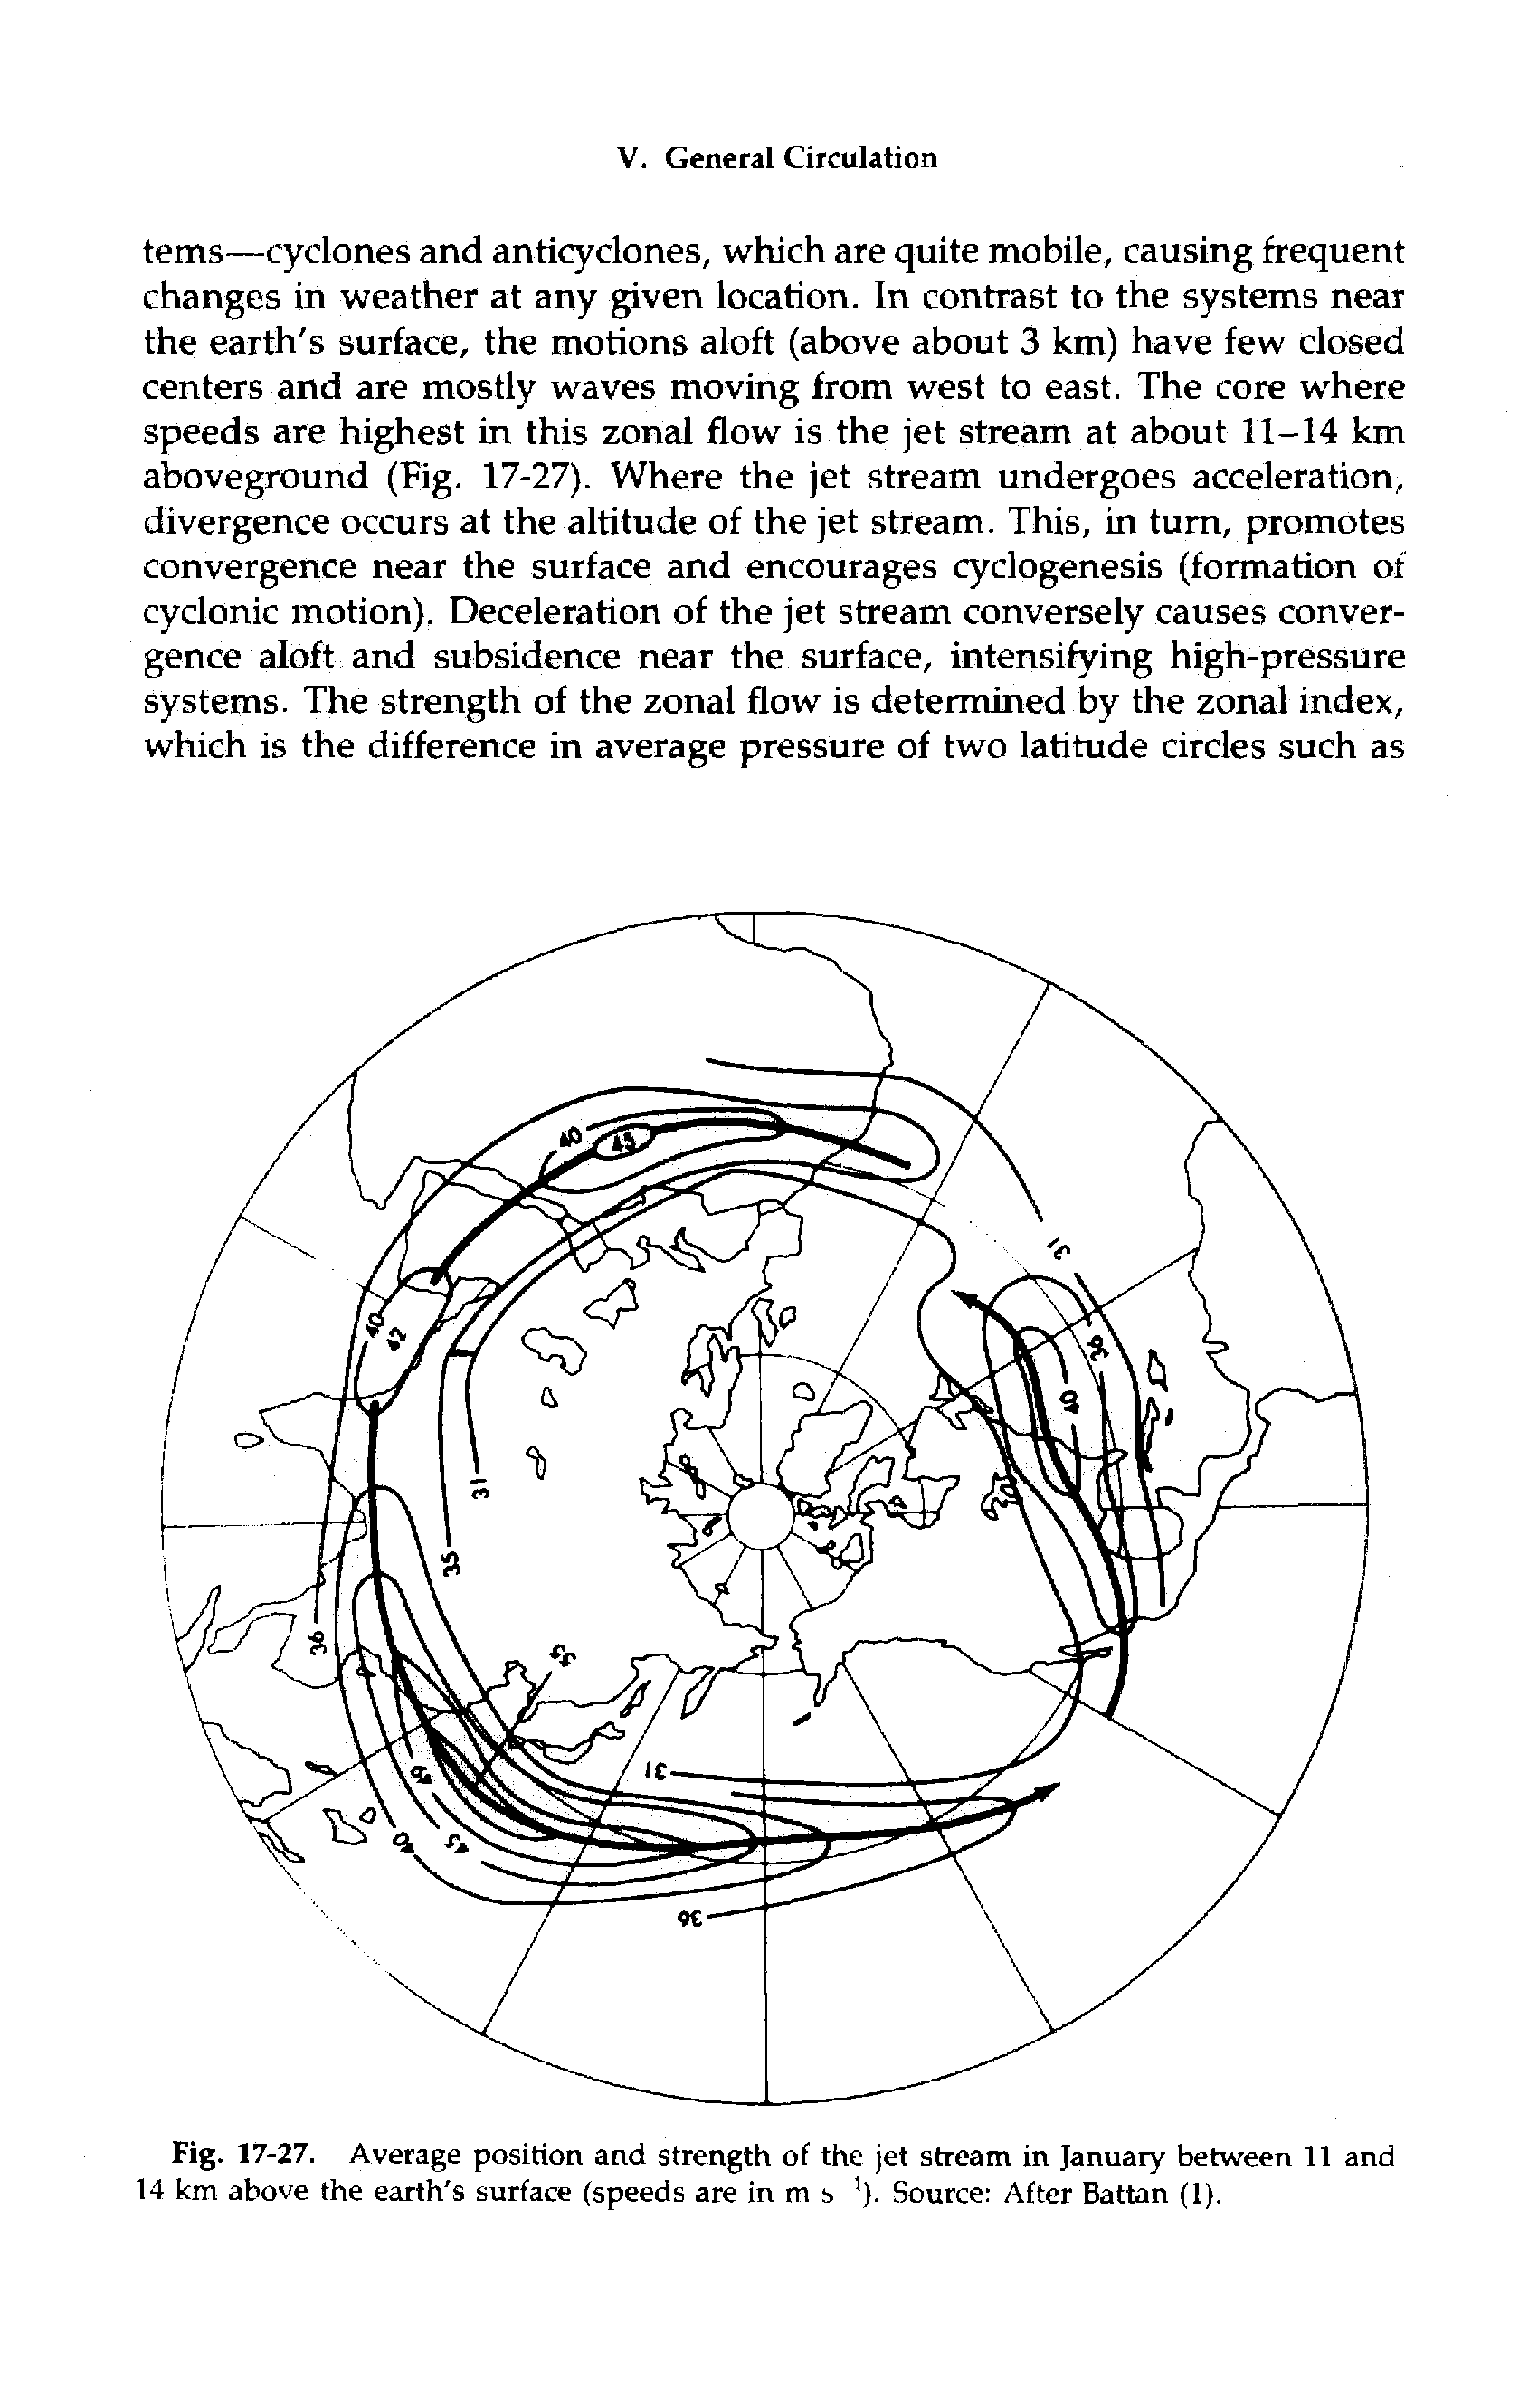 Fig. 17-27. Average position and strength of the jet stream in January between 11 and 14 km above the earth s surface (speeds are in m s ). Source After Battan (1).